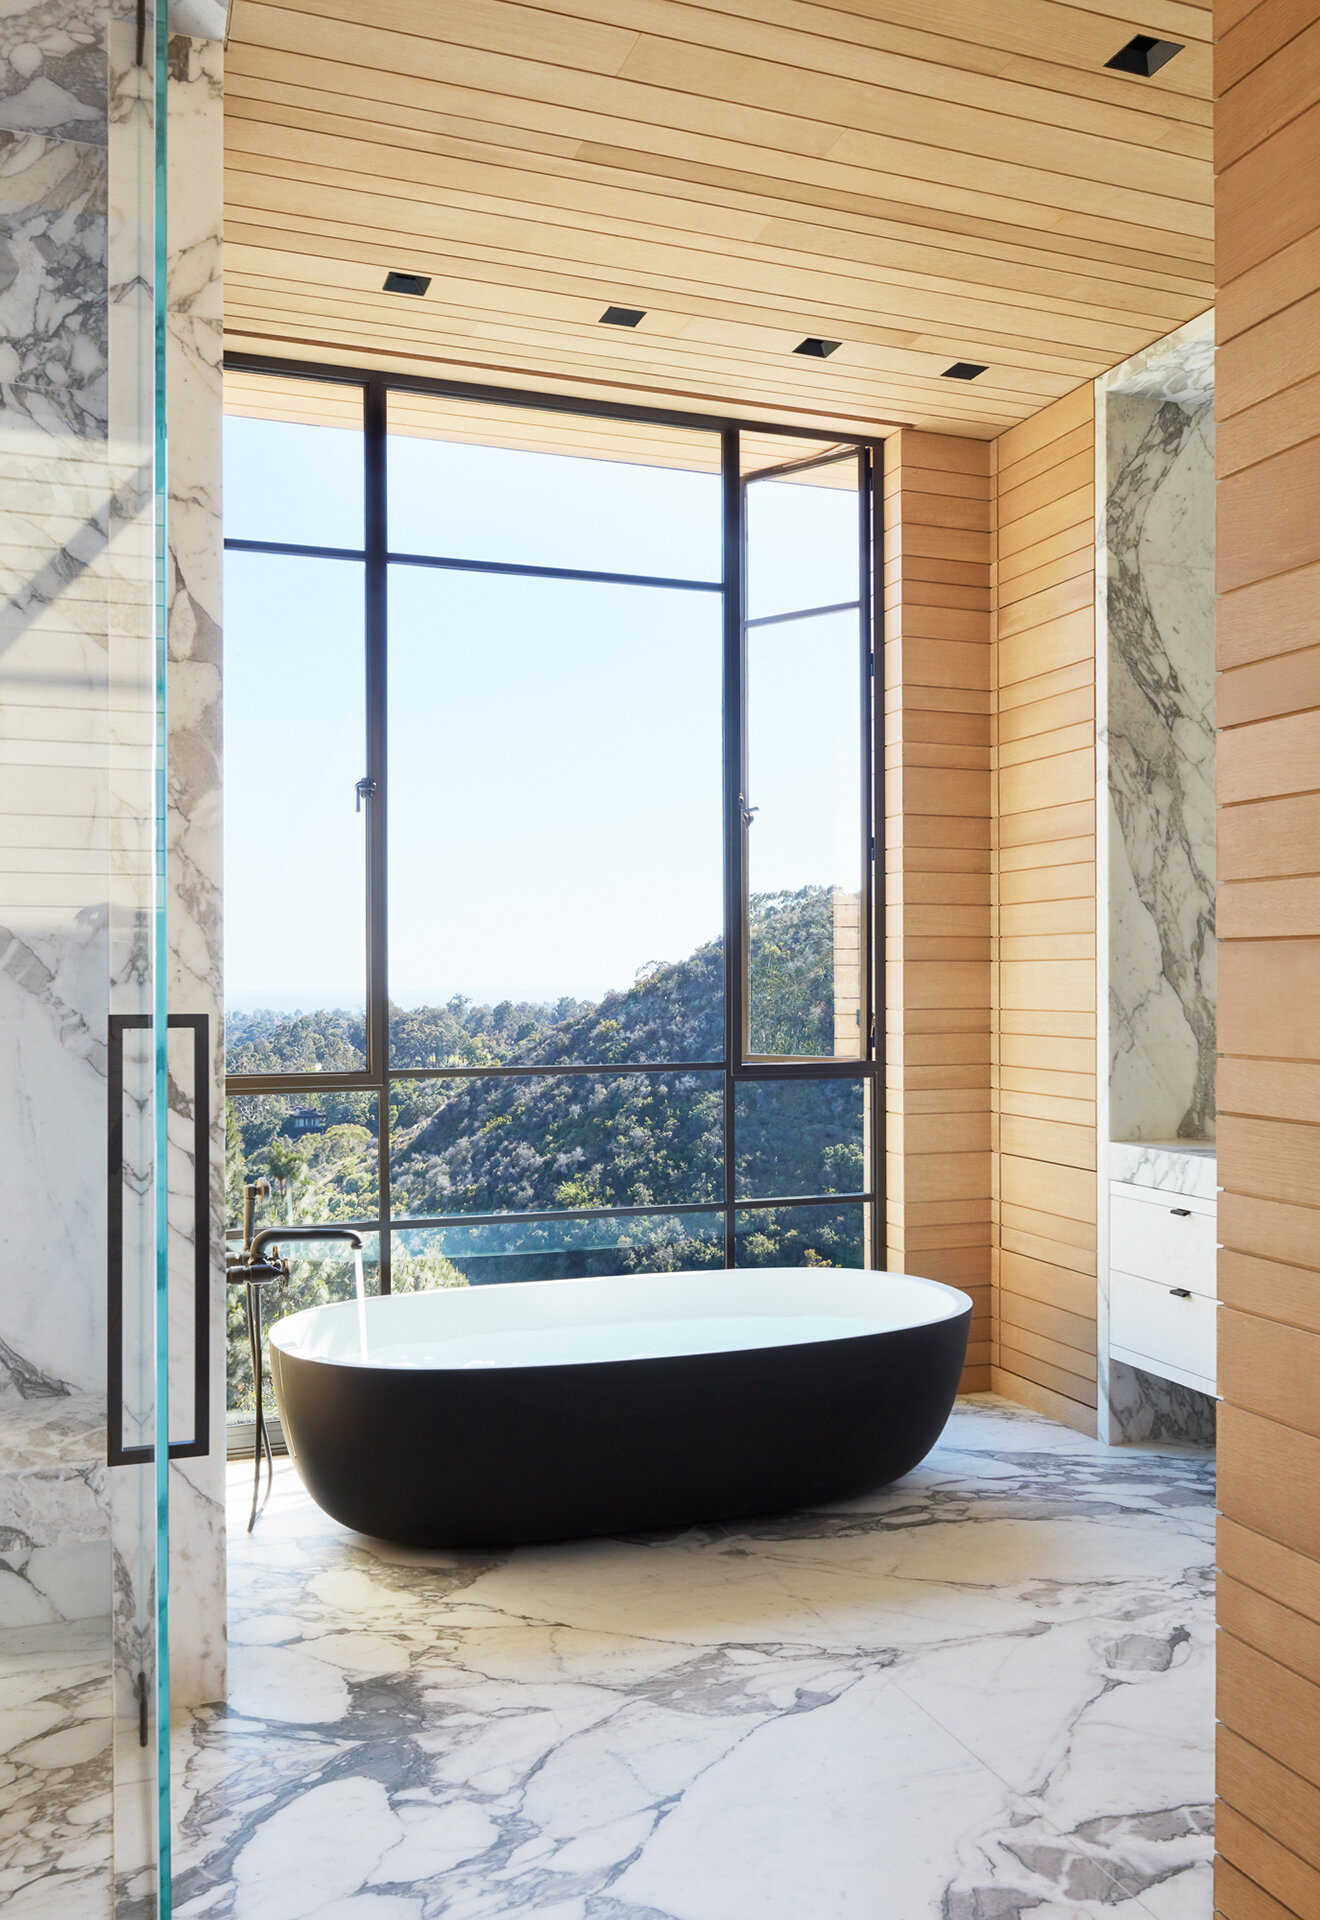  Custom luxury home general contractor built modern private residence in the Pacific Palisades neighborhood of Los Angeles featuring glamorous master suite bathroom with freestanding matte black bathtub and bold marble walls.  